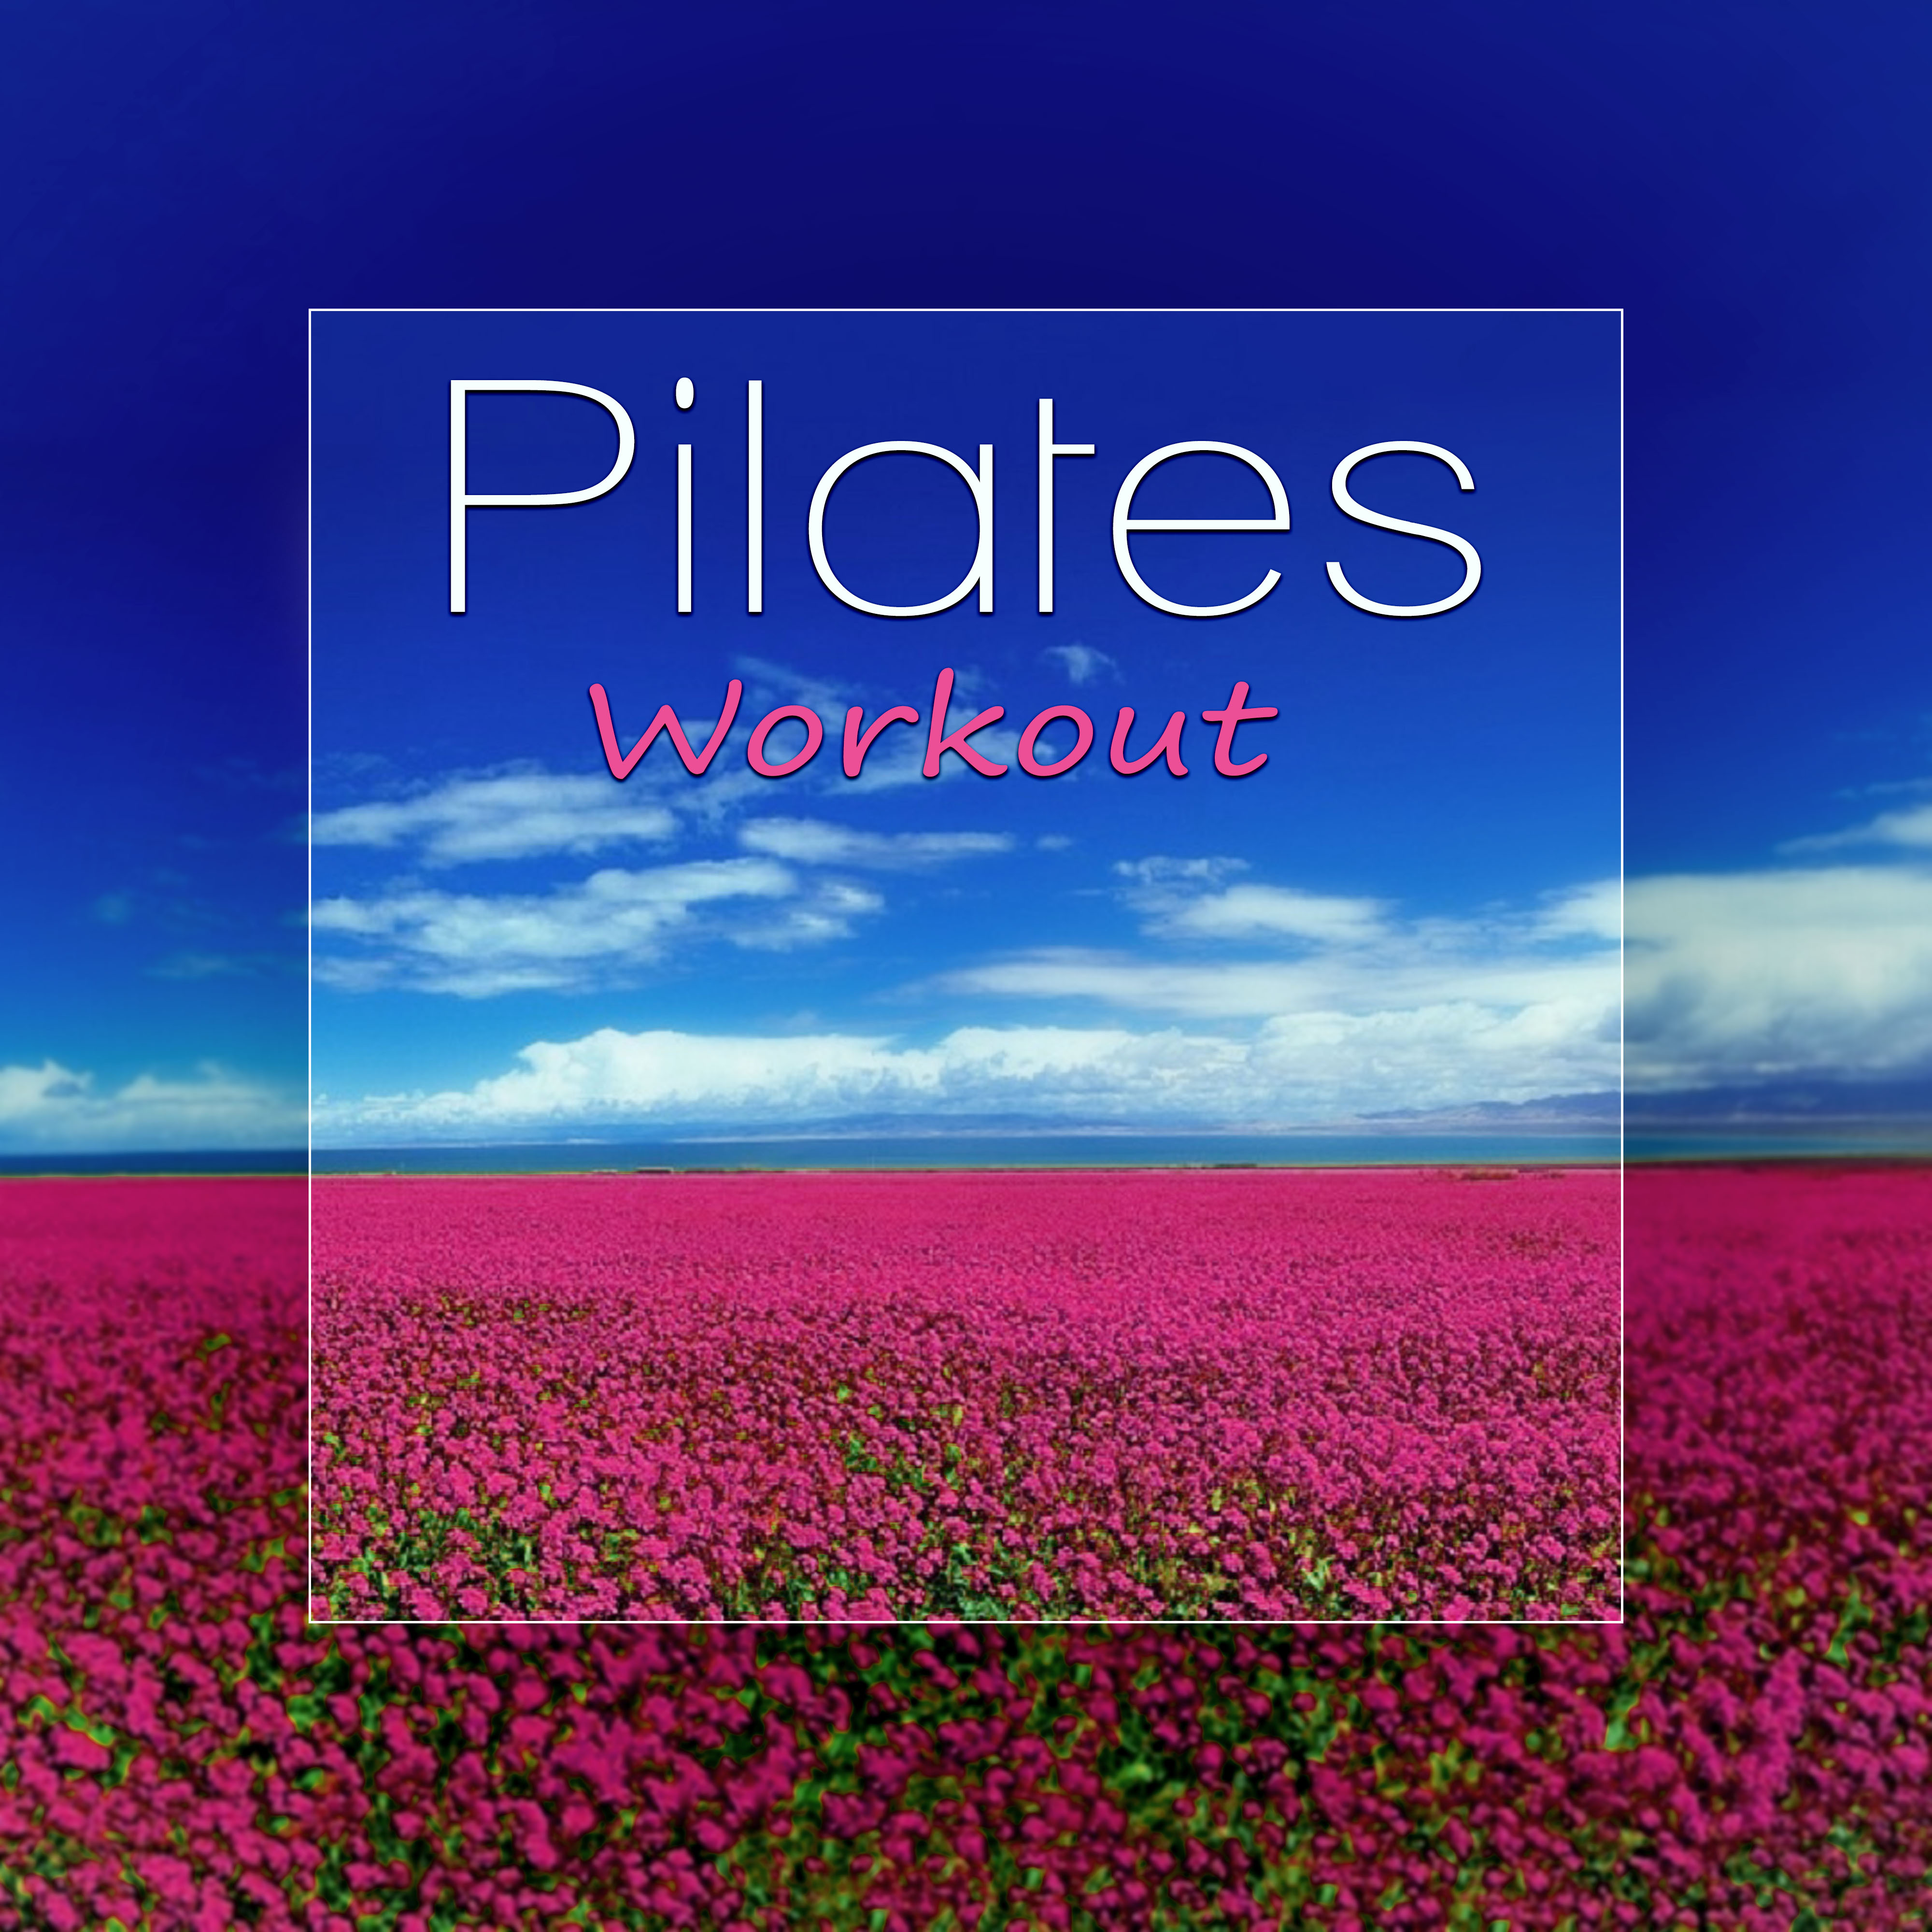 Pilates Workout – Soft Music, Relax, Pilates, Concentration Sounds, Exercise